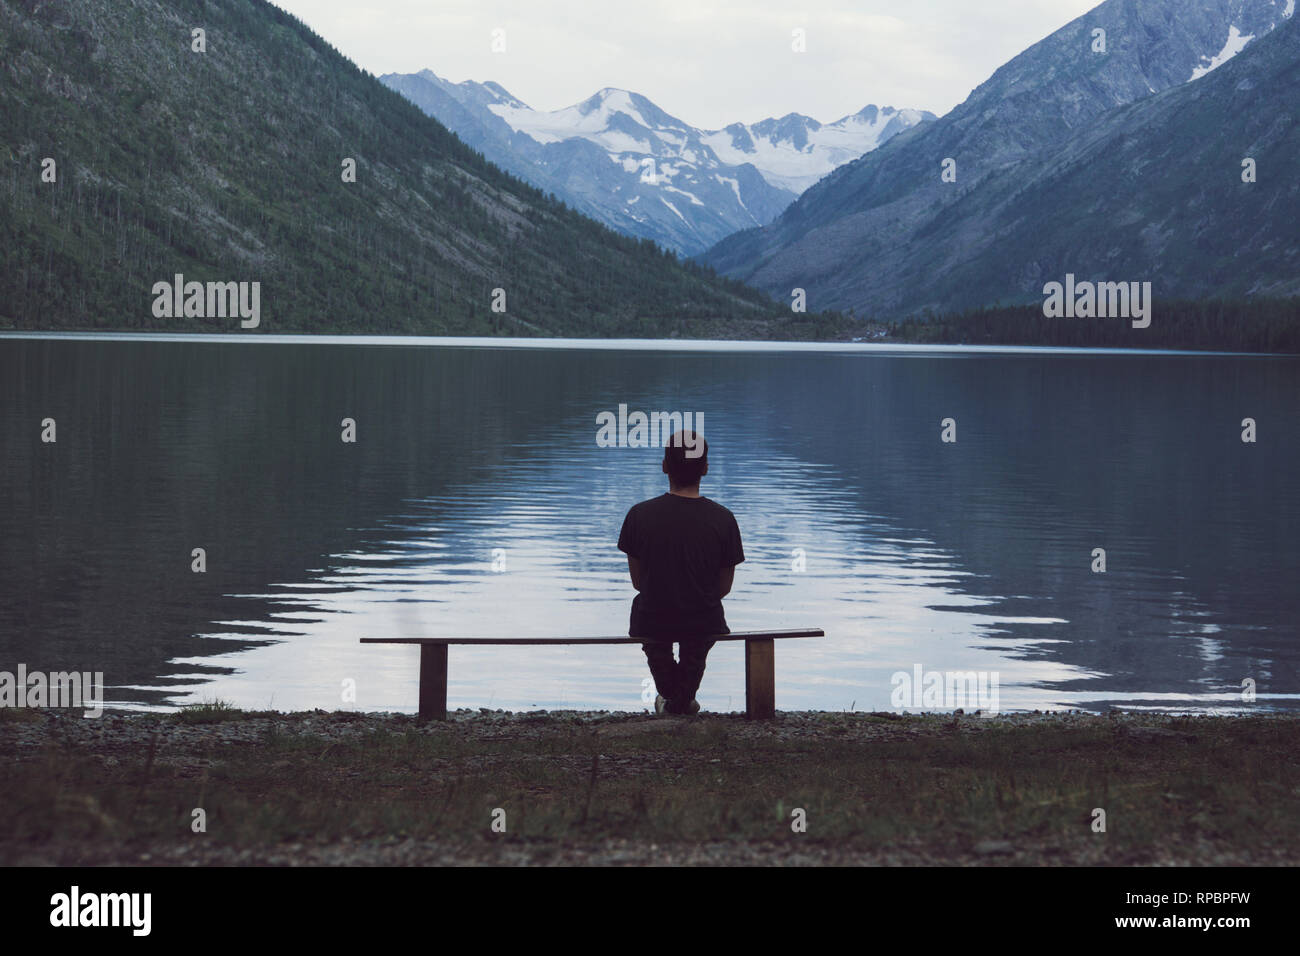 Man sitting on bench overlooking like. The concept of loneliness. Stock Photo